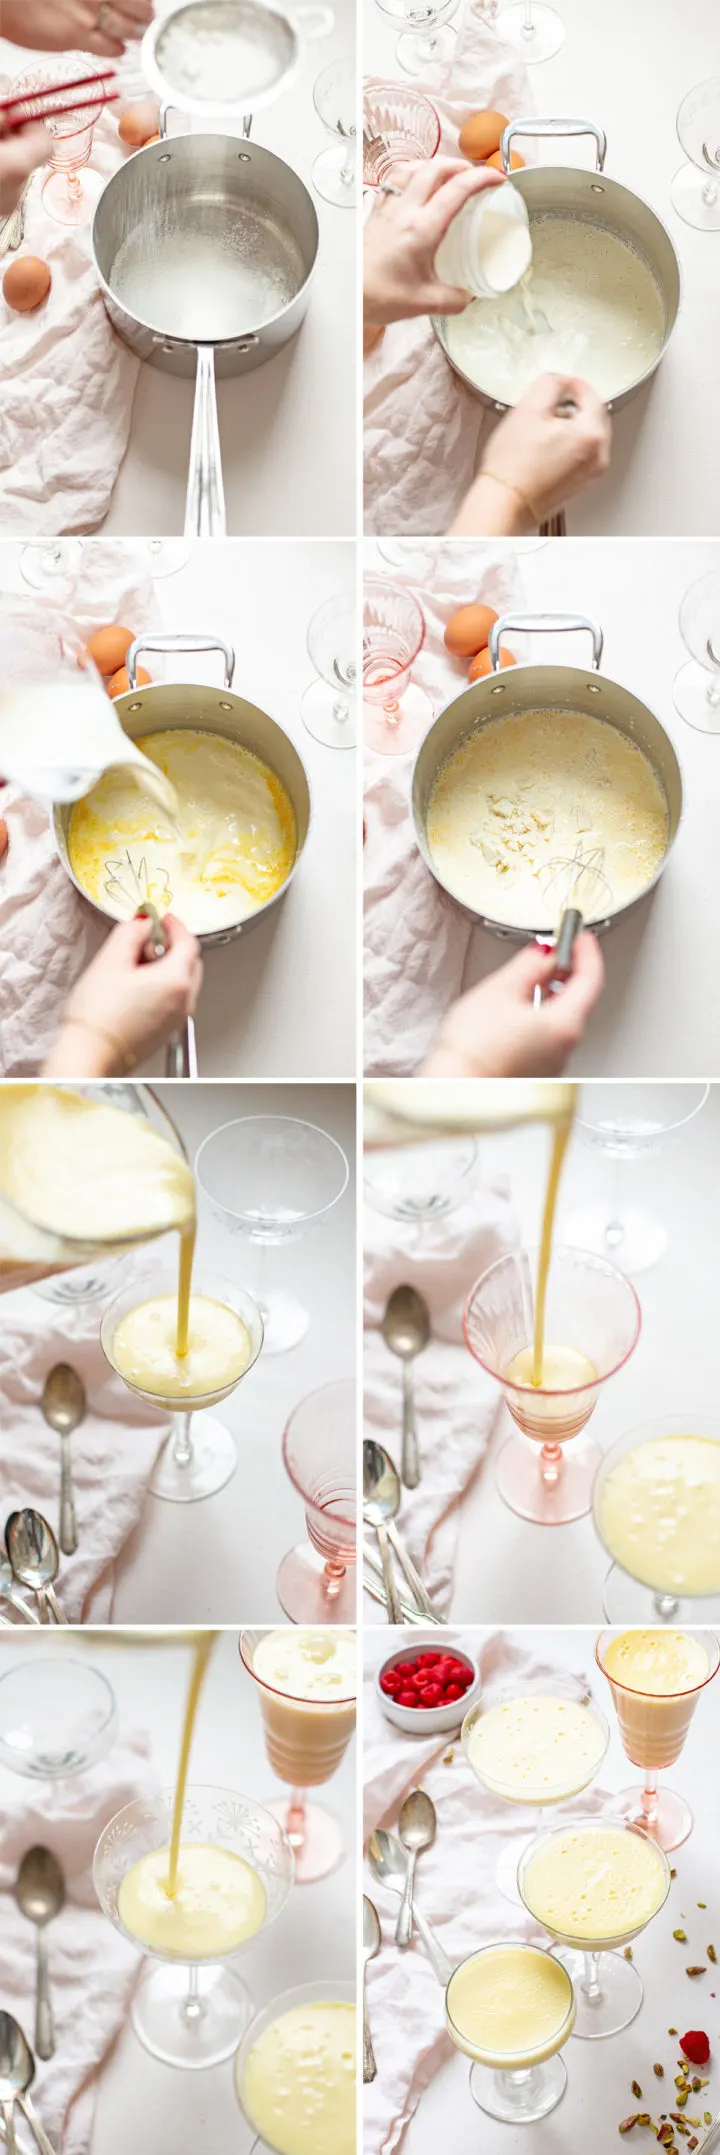 step by step photos showing how to make this recipe for pudding
